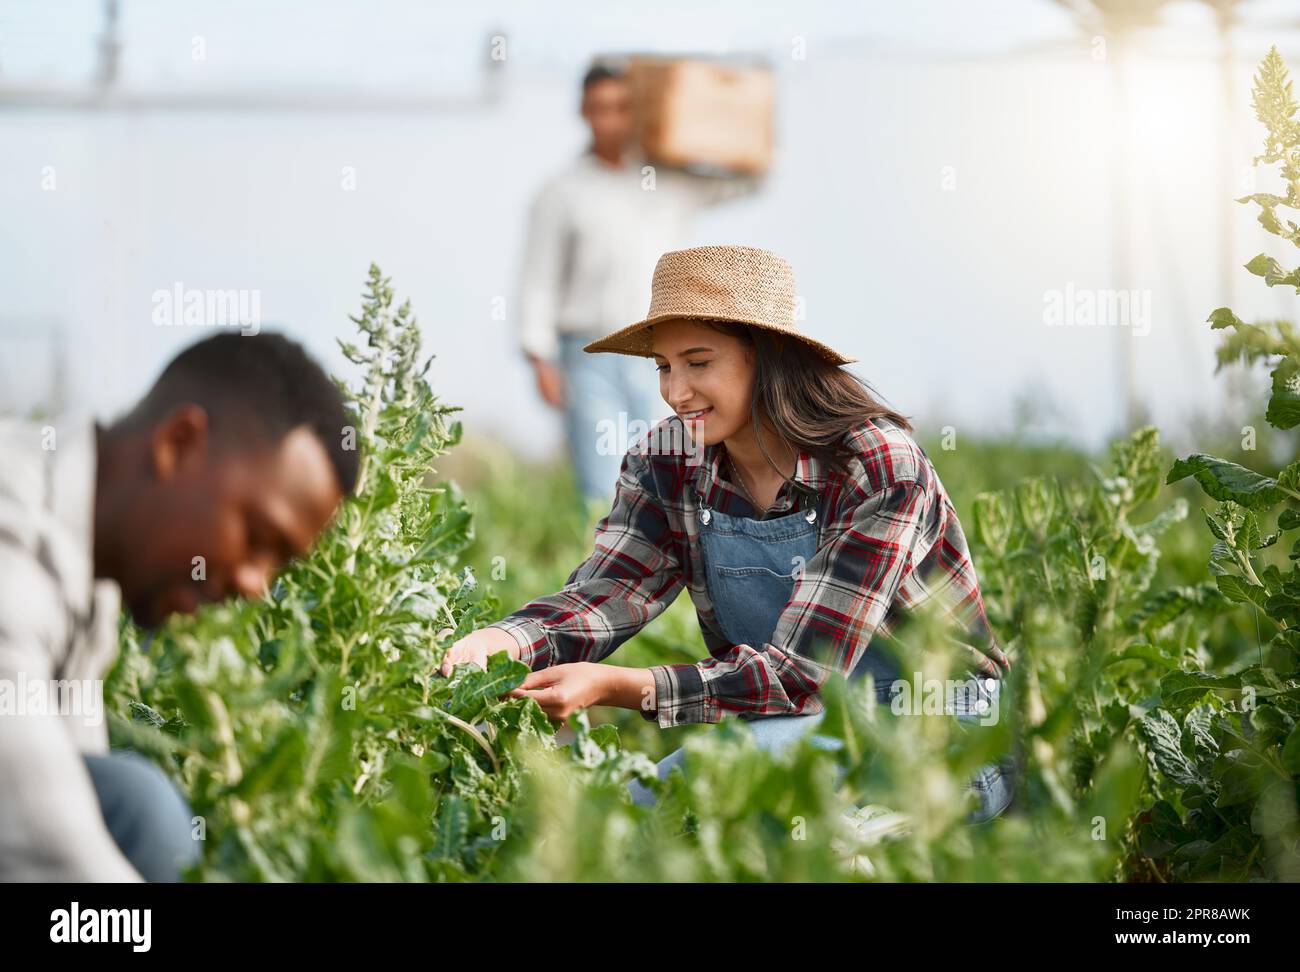 Everyone loves tending to the green garden. Shot of a young woman tending to crops on a farm. Stock Photo